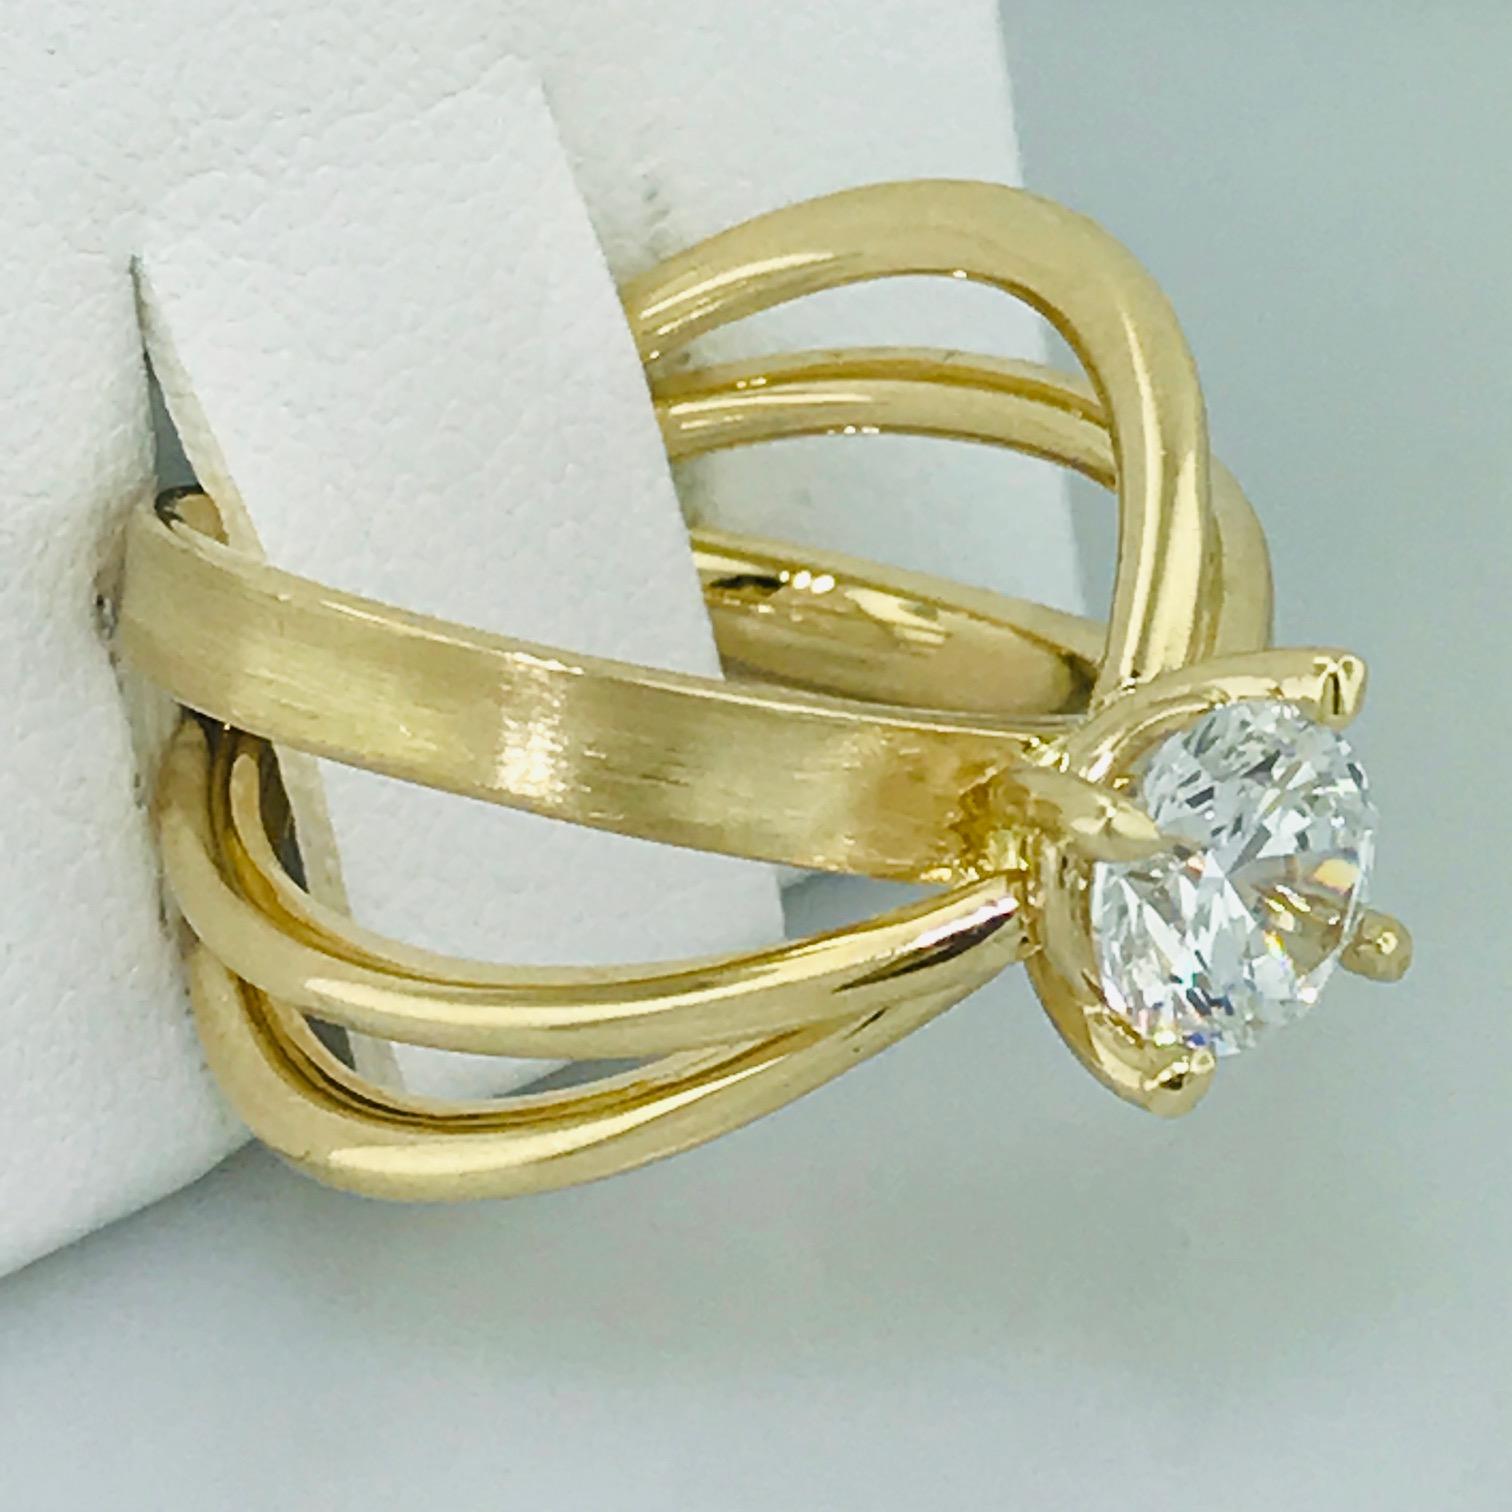 1.00 Carat X Design Solitaire Satin and Polish Ring in 14 Karat Yellow Gold In New Condition For Sale In Austin, TX